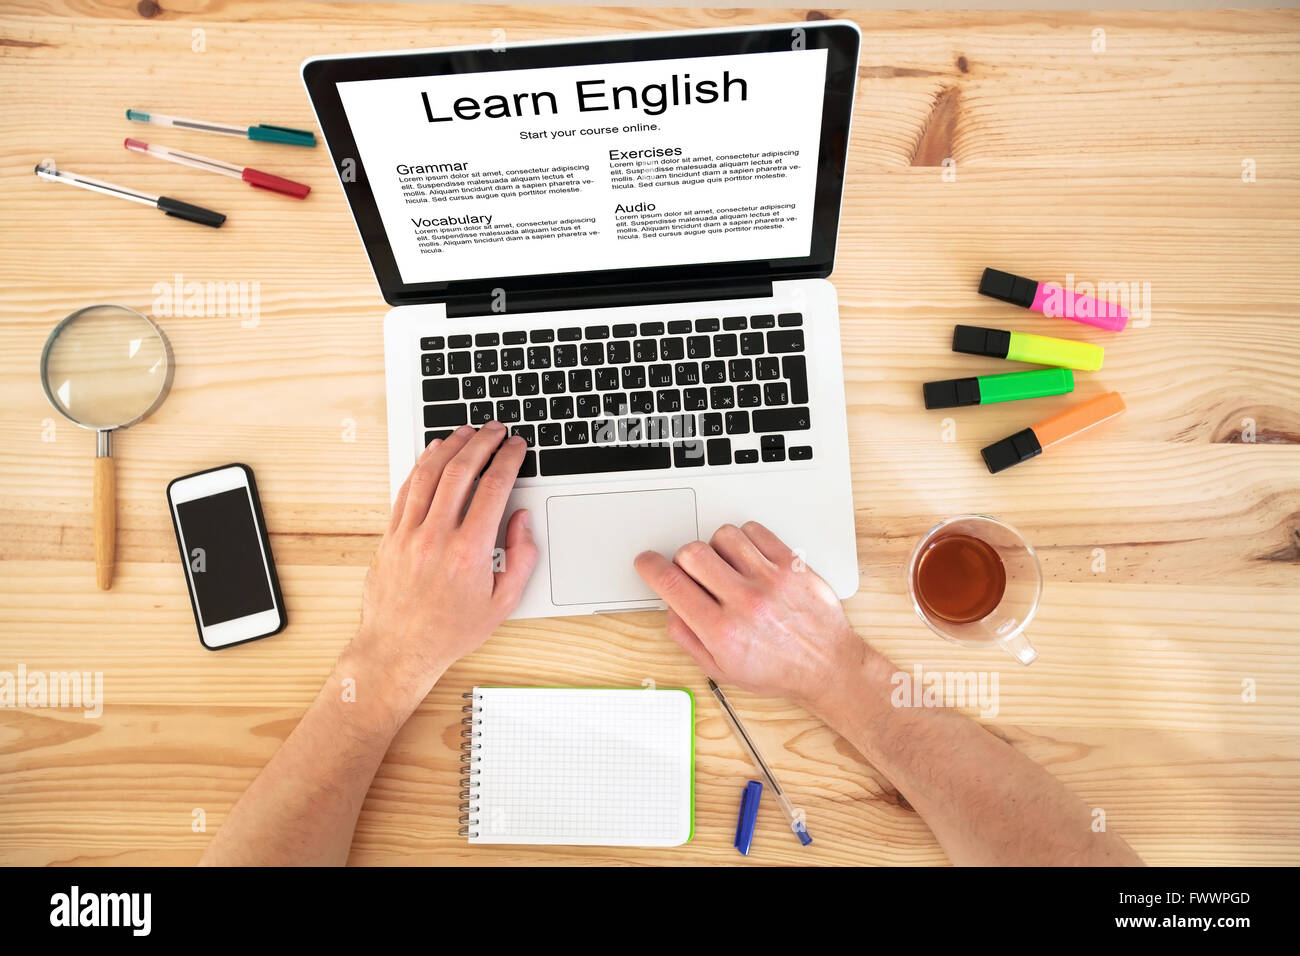 learn english online, concept, language courses on internet Stock Photo